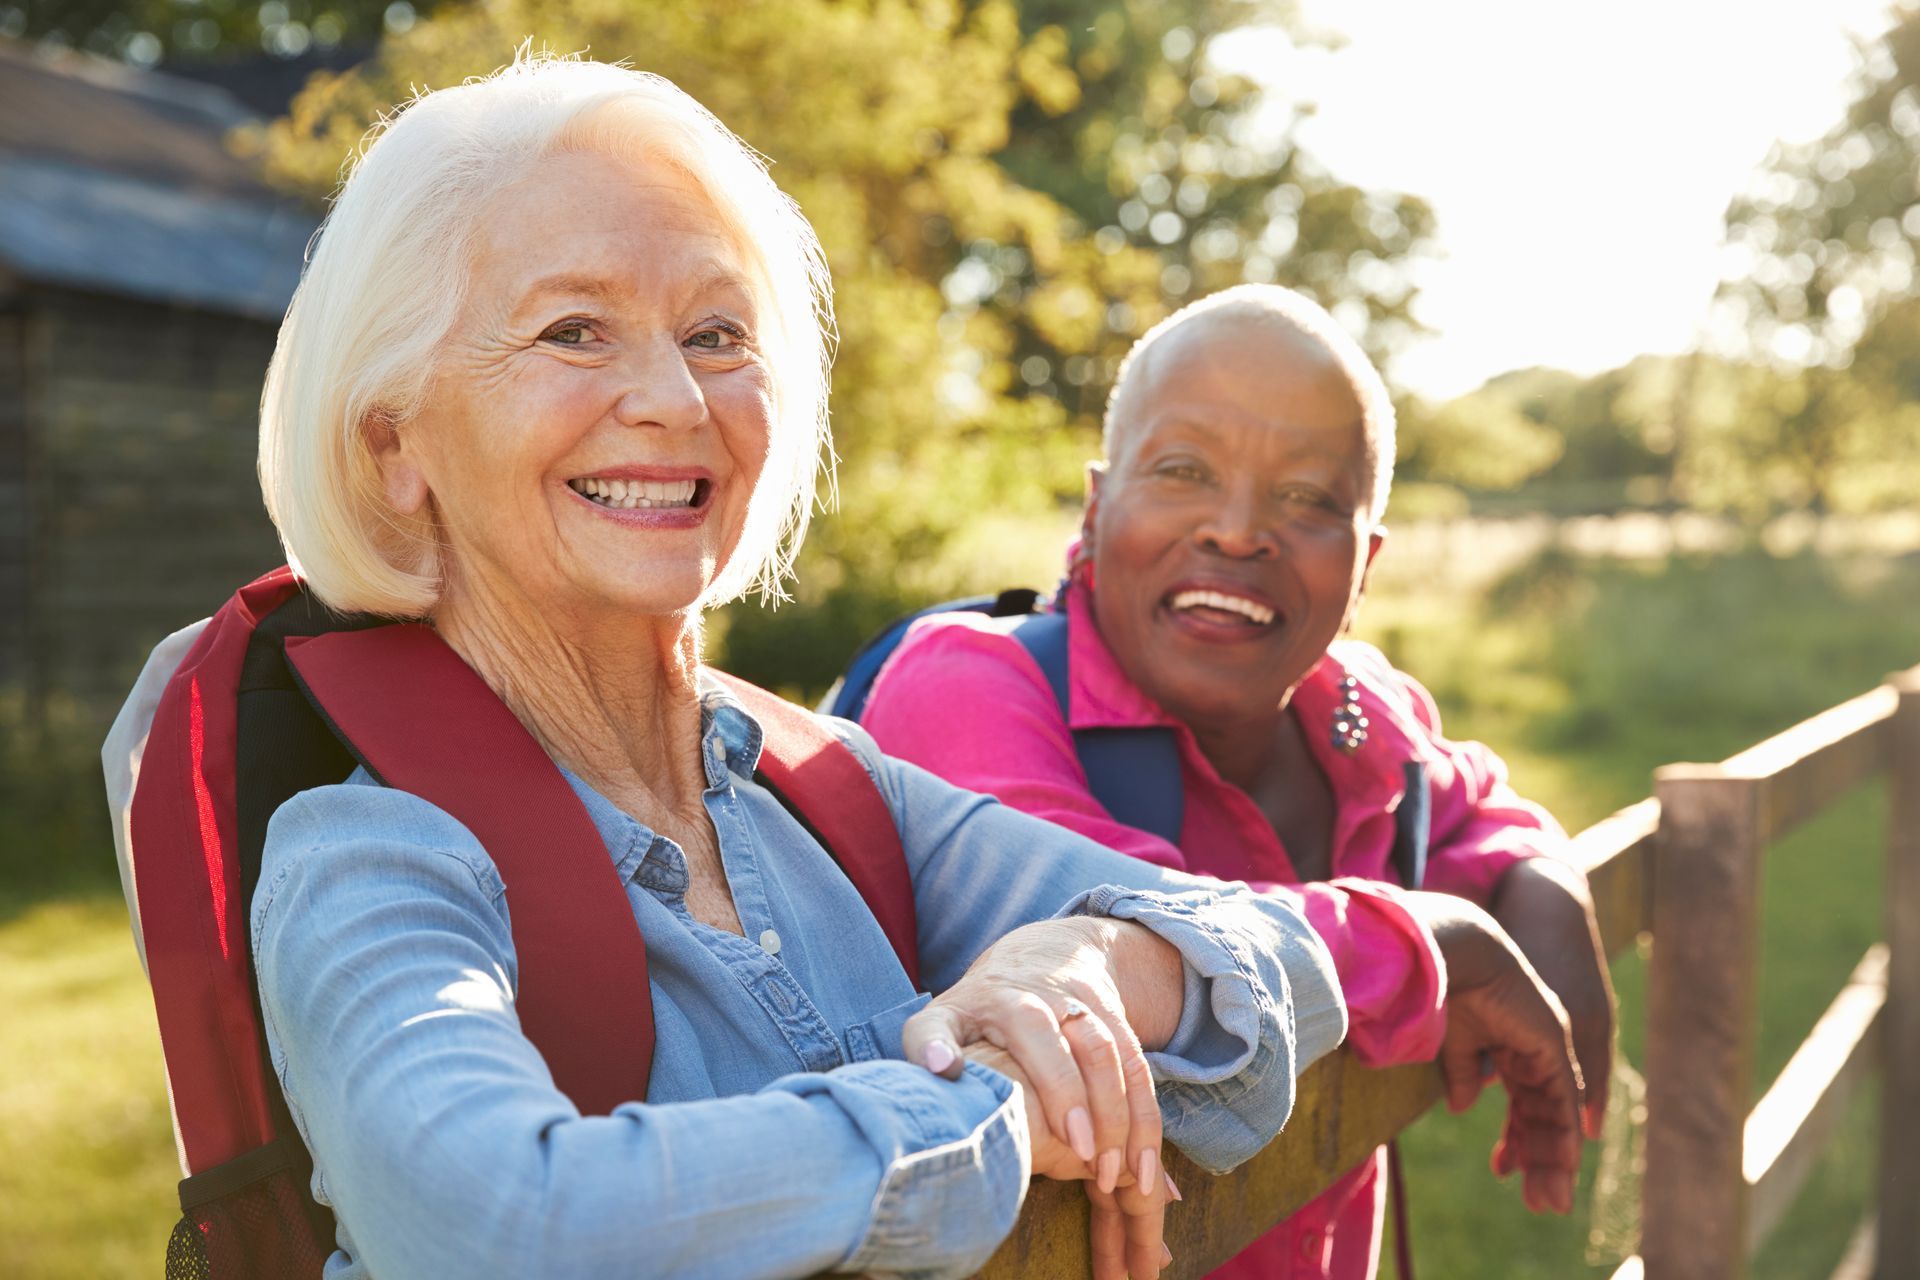 two elderly women with backpacks are standing next to each other and smiling .